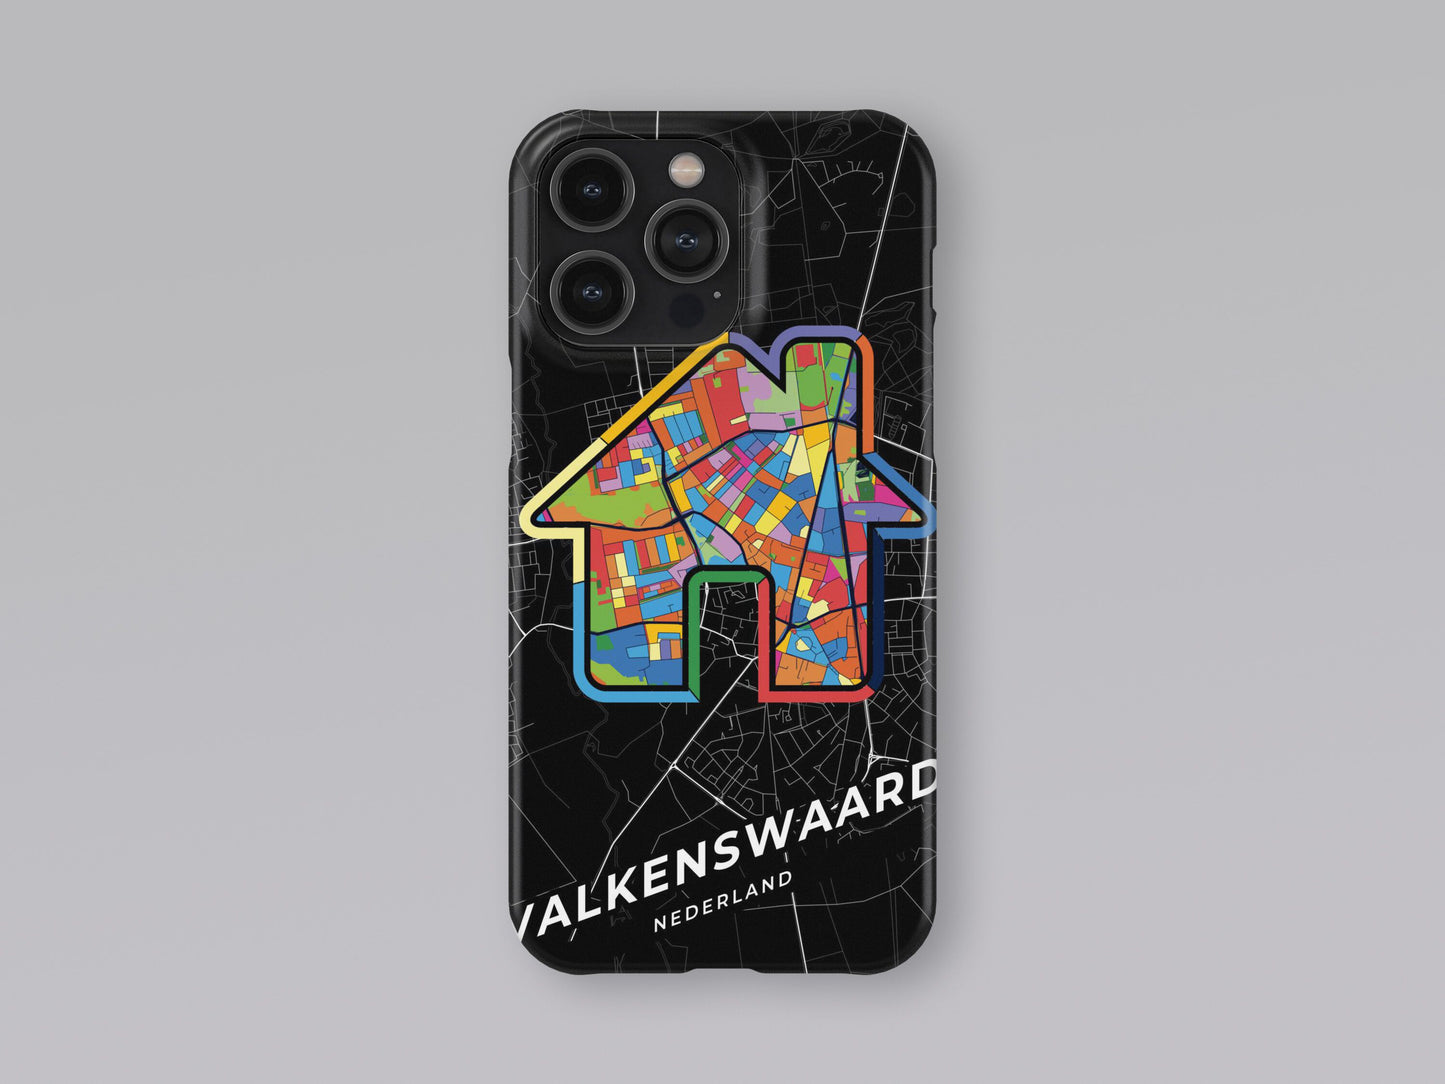 Valkenswaard Netherlands slim phone case with colorful icon 3